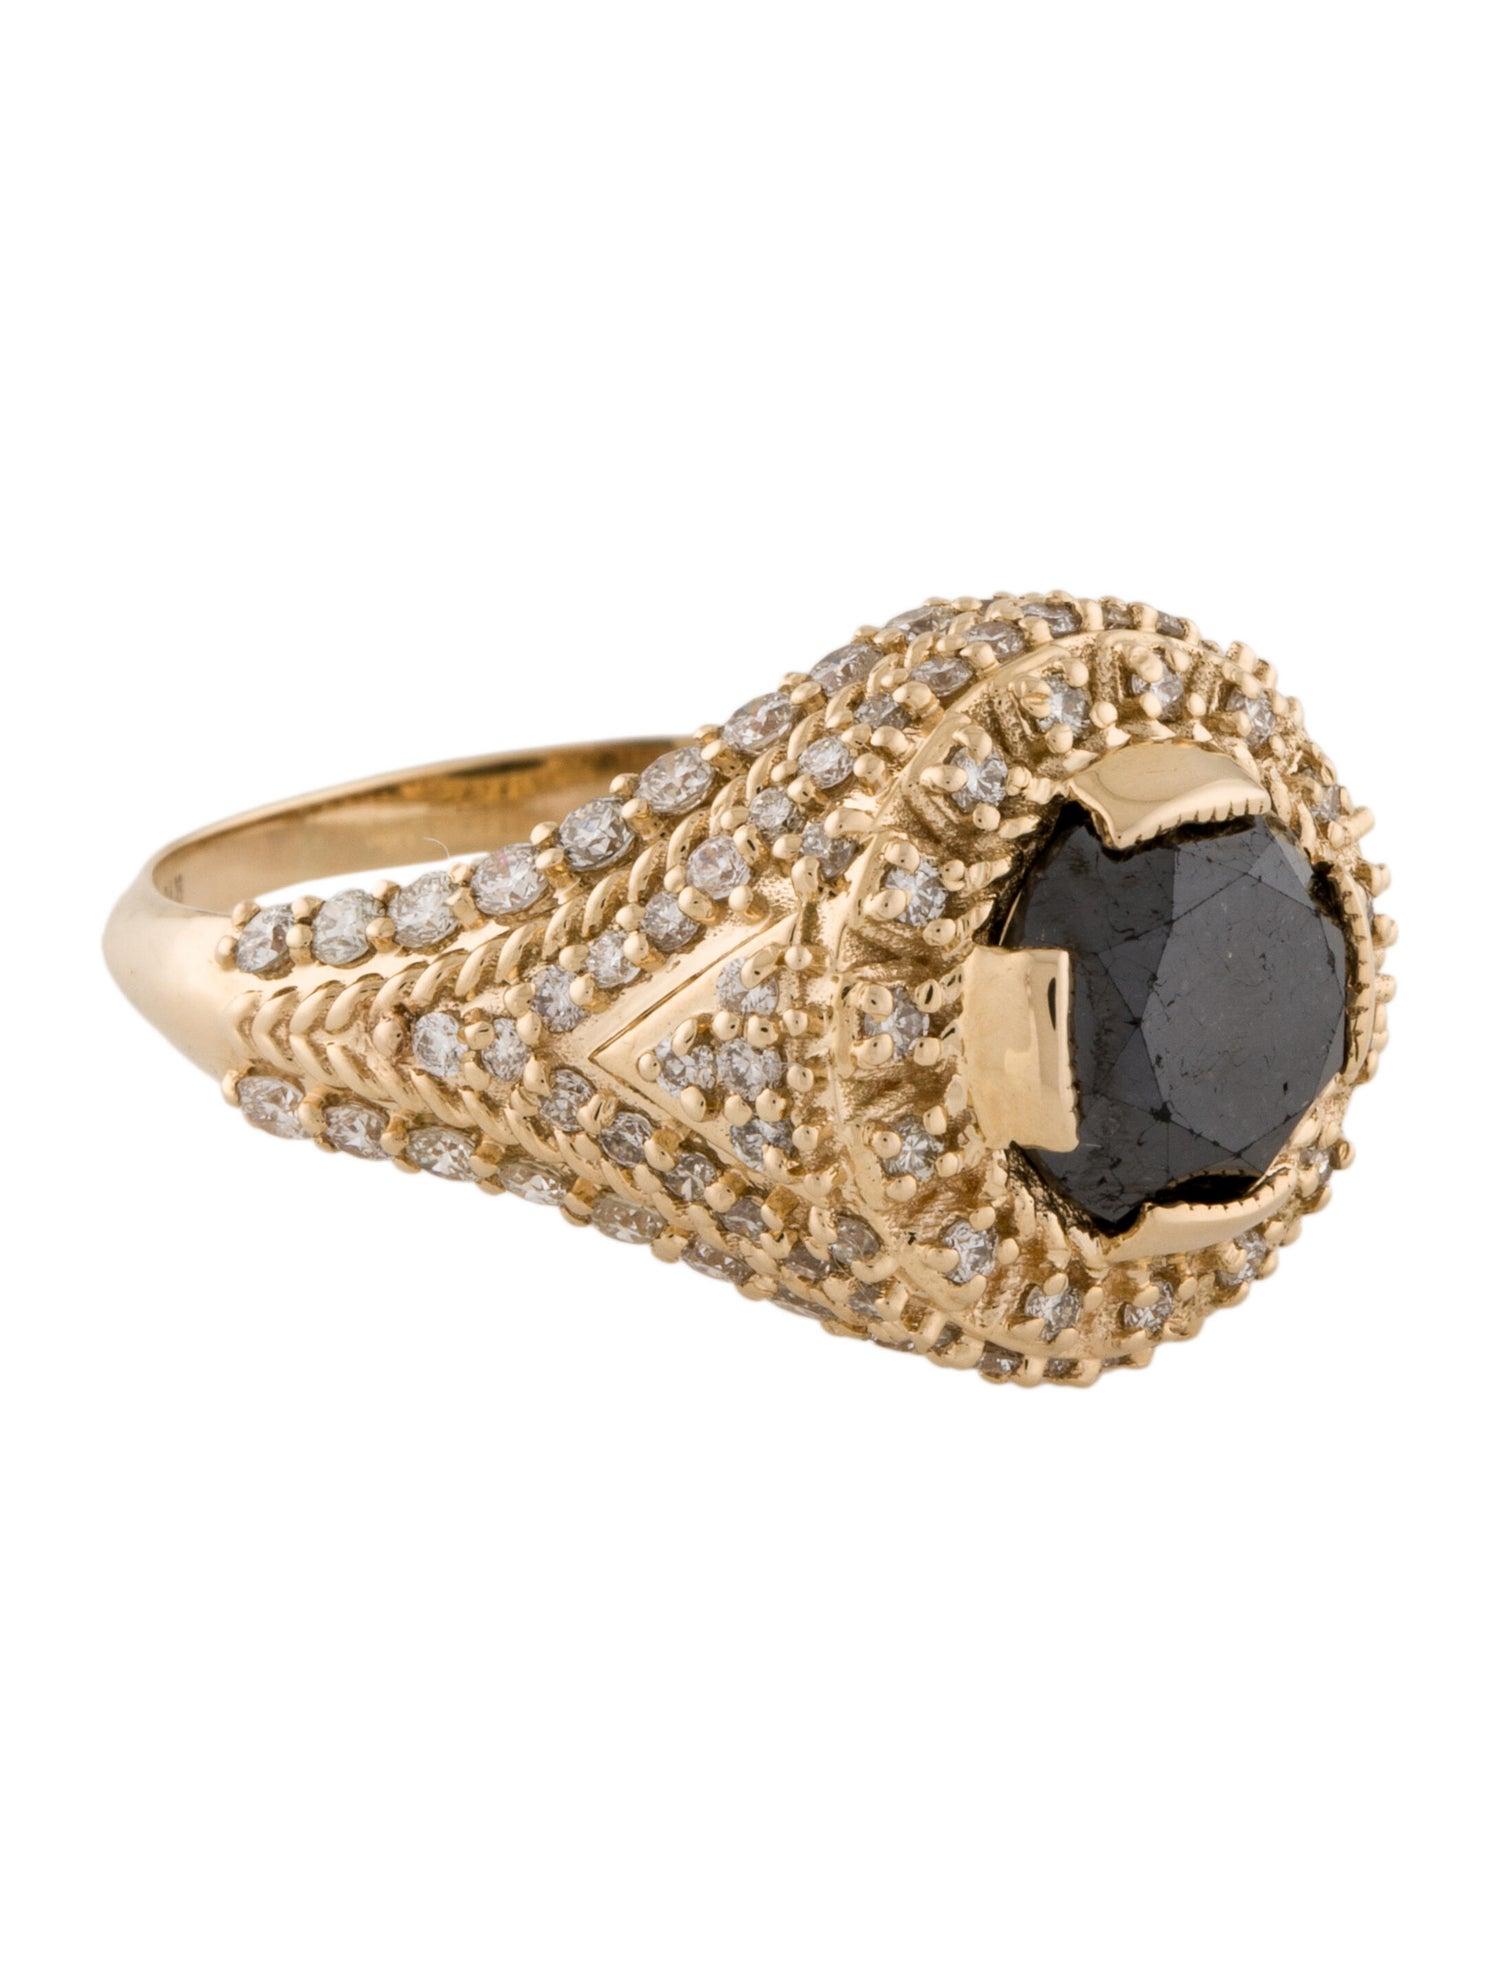 Evoke the raw power and energy of a volcanic eruption with our Magma Blaze Black Diamond Ring. Crafted with meticulous attention to detail, this exquisite piece is a testament to the natural world's breathtaking beauty.

Set in 14k yellow gold, the